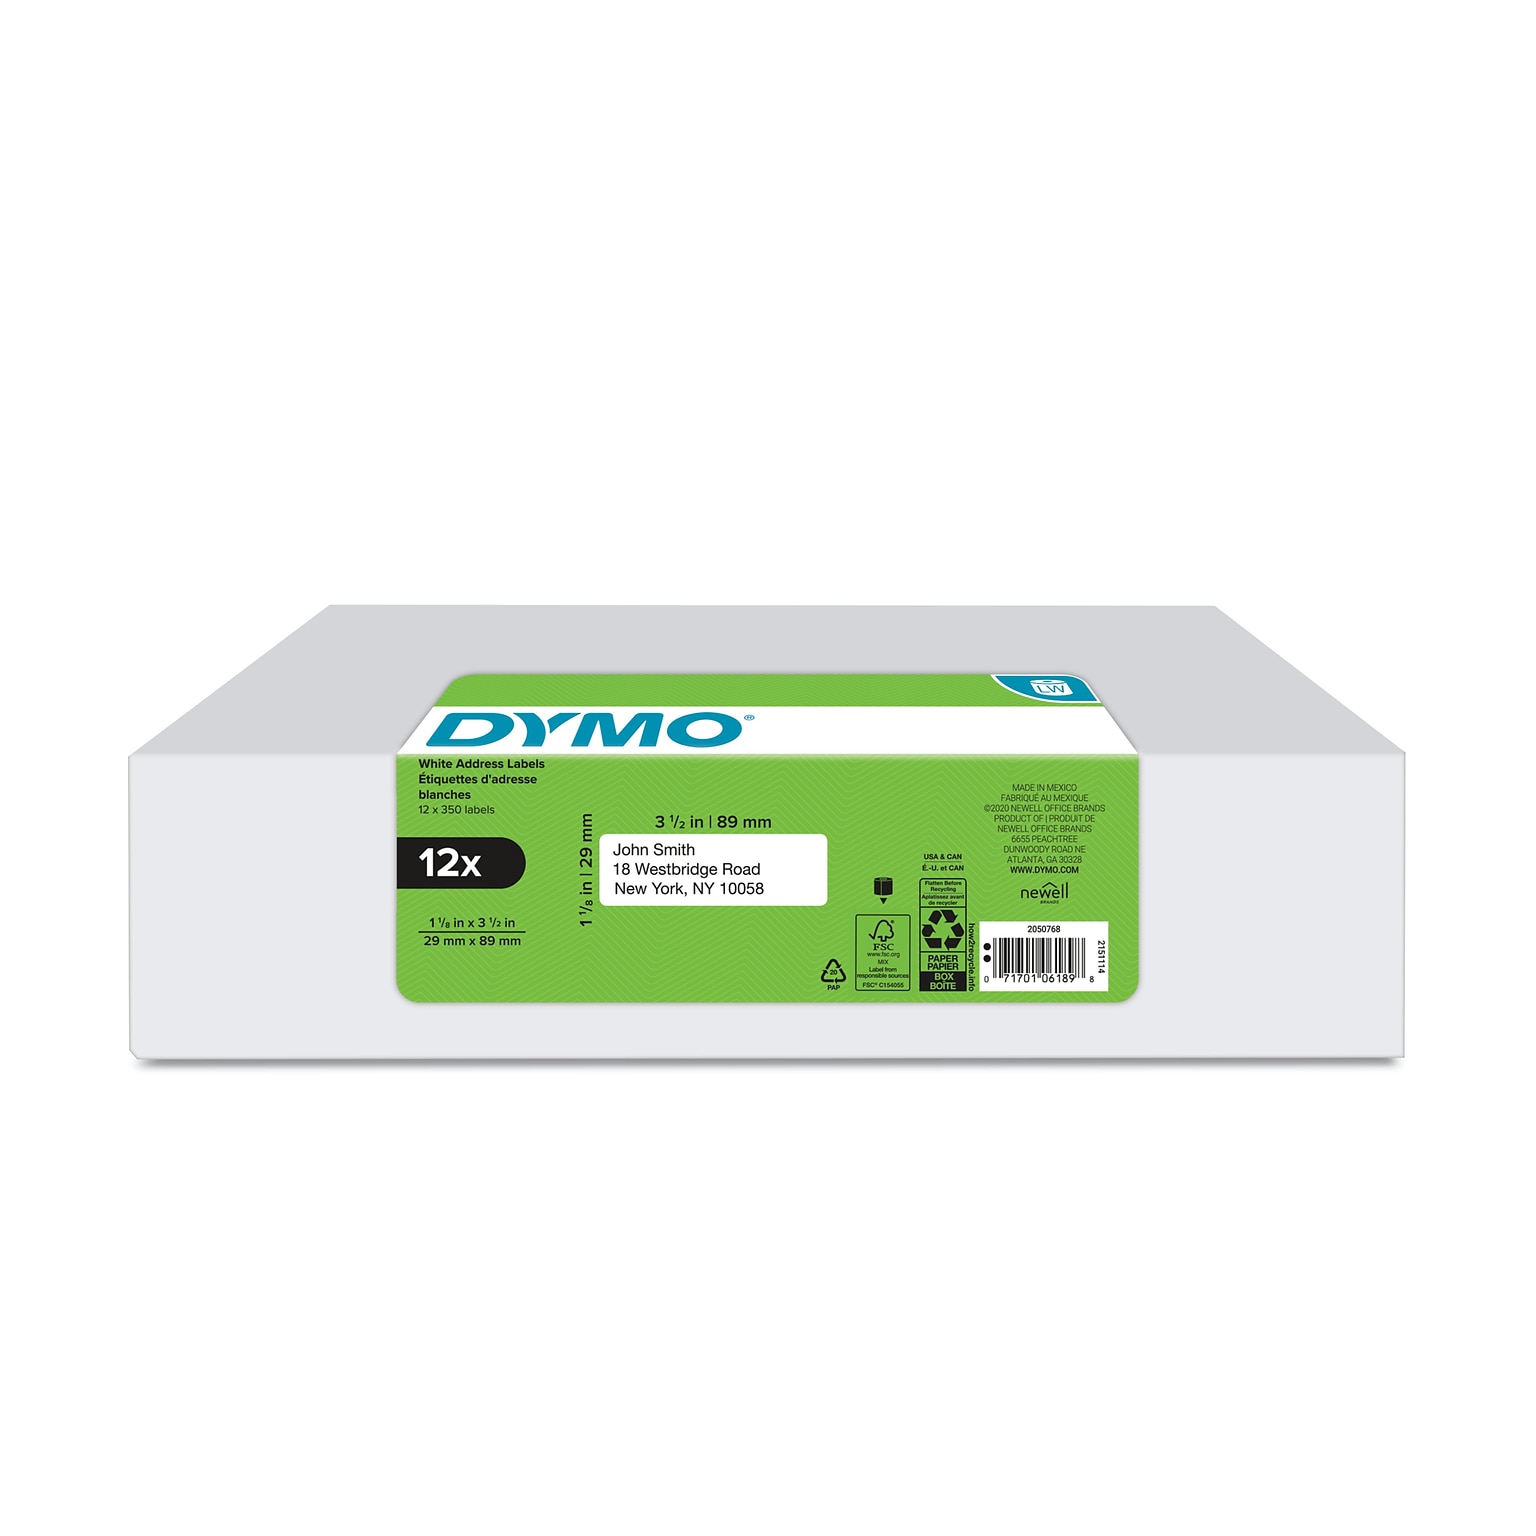 DYMO LabelWriter 2050768 Mailing Address Labels, 3-1/2 x 1-1/8, Black on White, 350 Labels/Roll, 12 Rolls/Box (2050768)